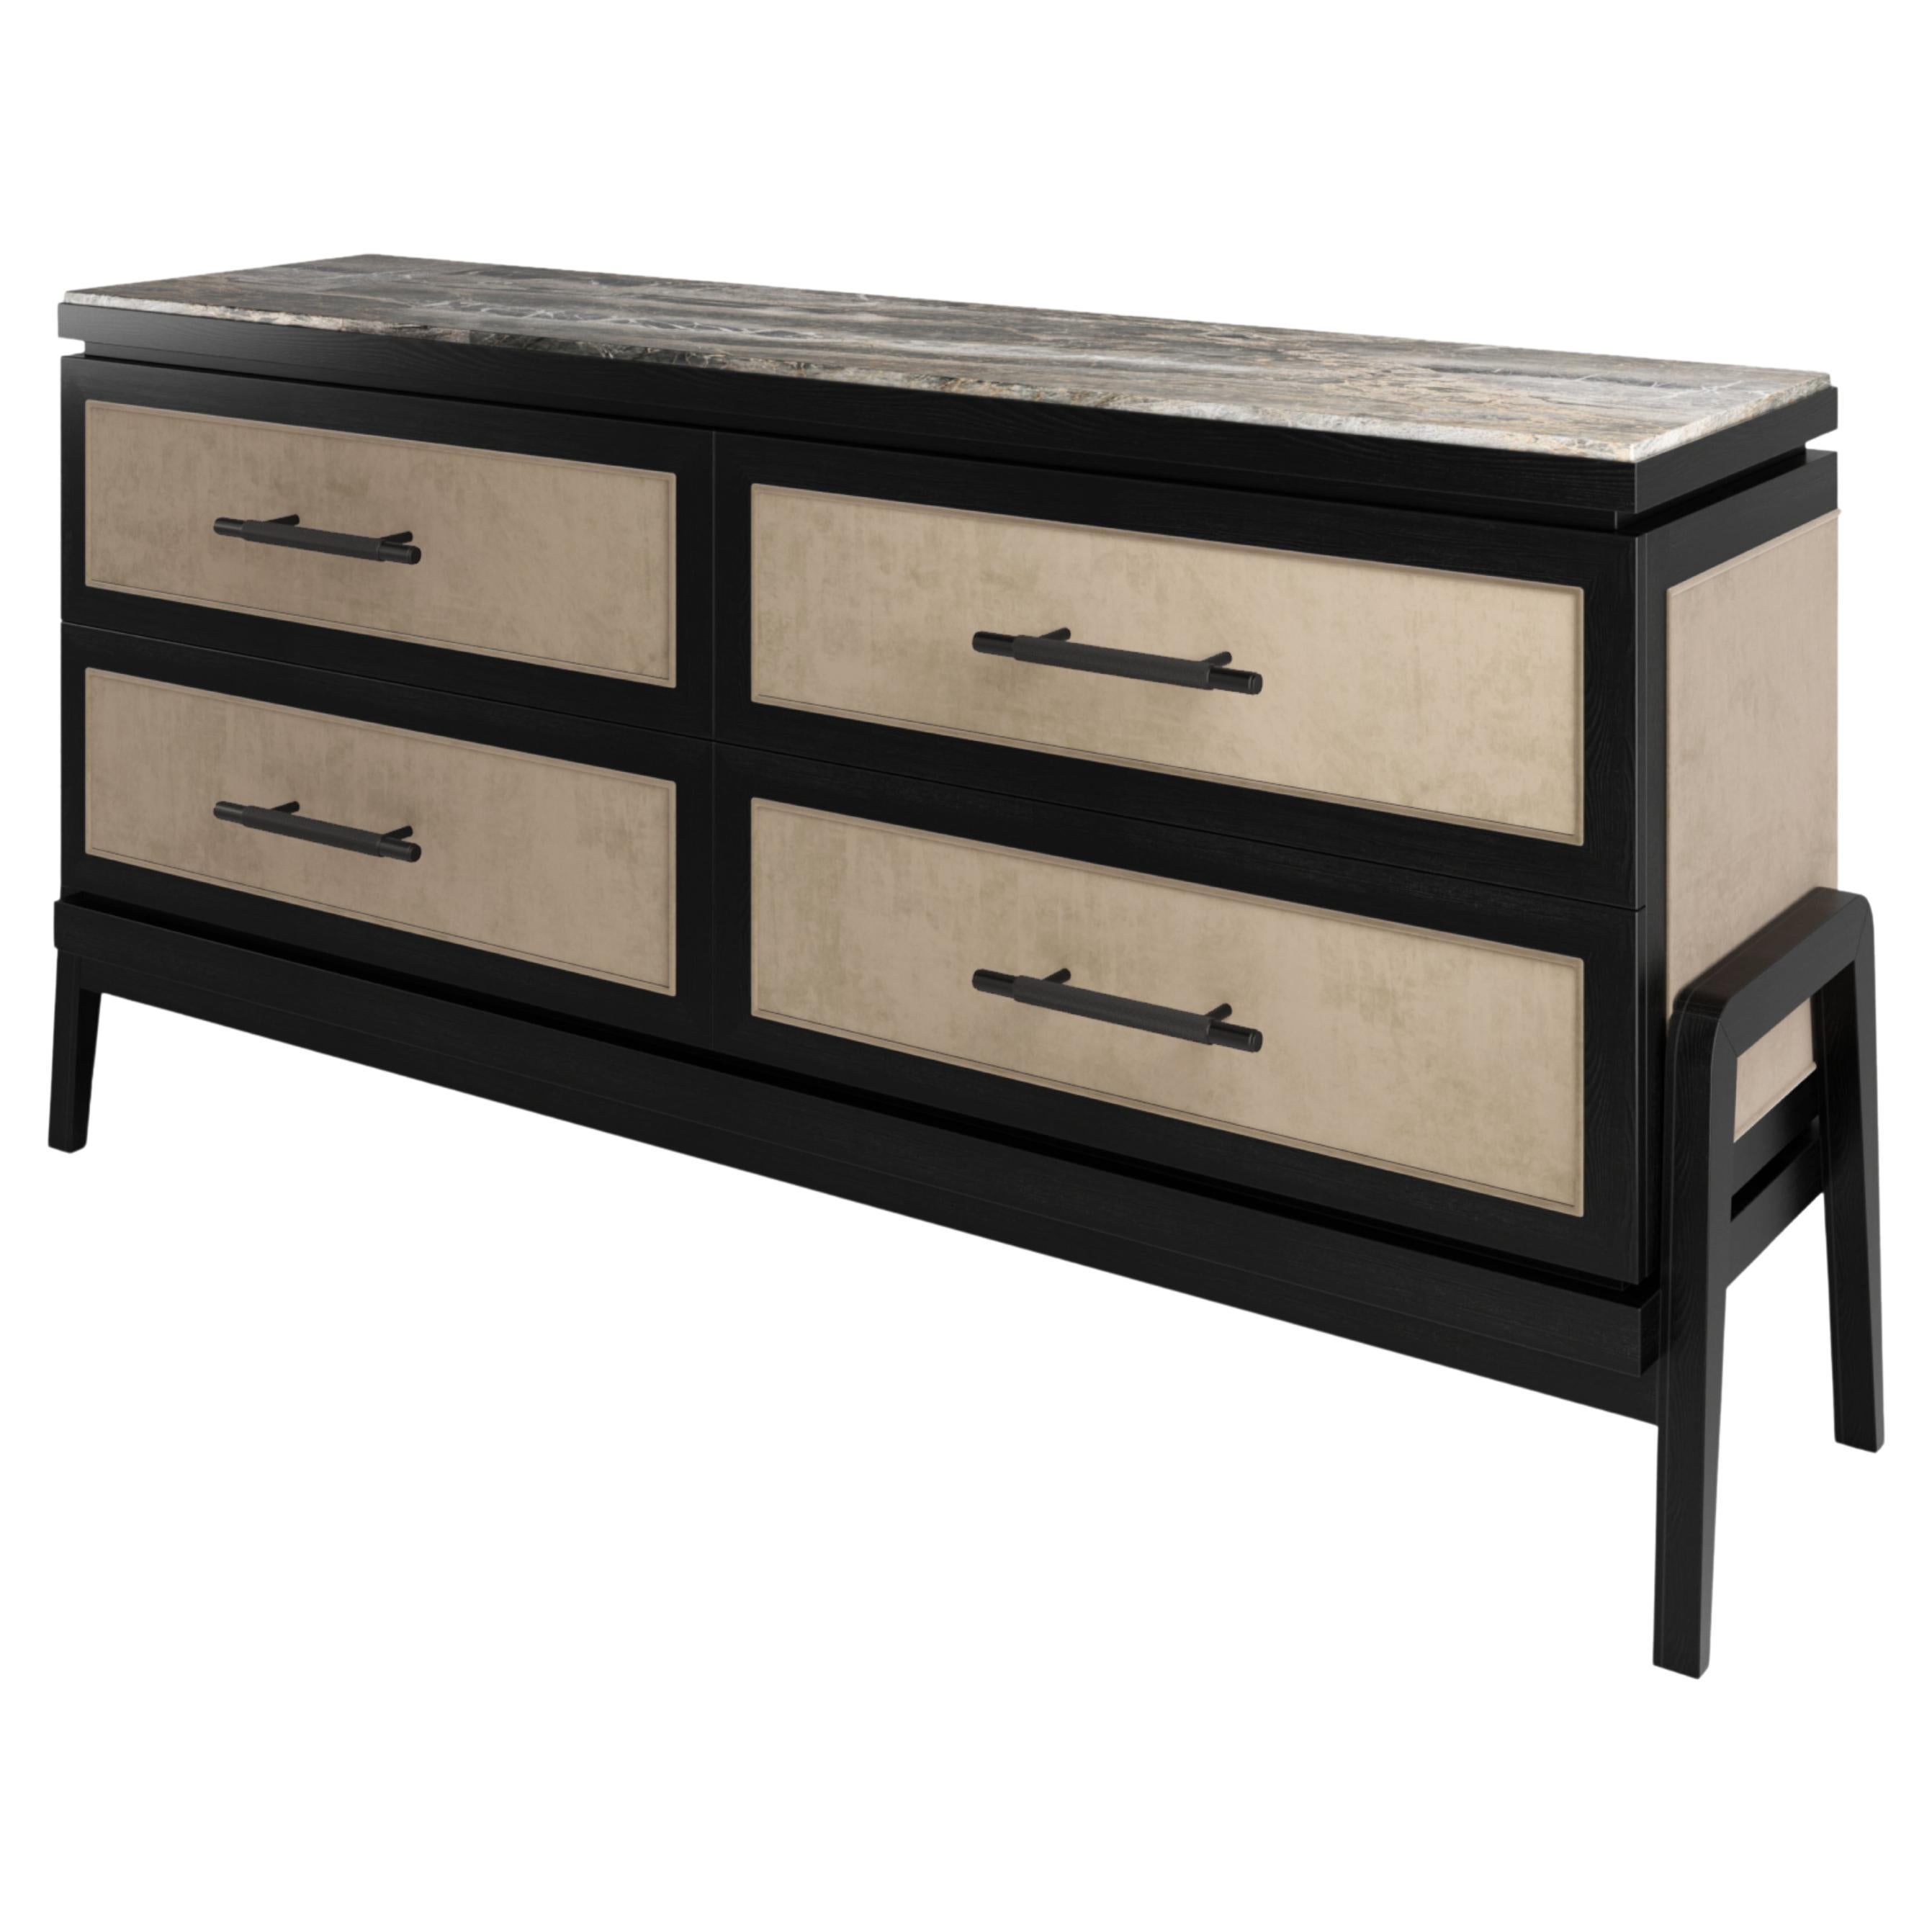 Art Deco Inspired Cupid Chests of Drawers in Show-Wood, Novasuede & Marble